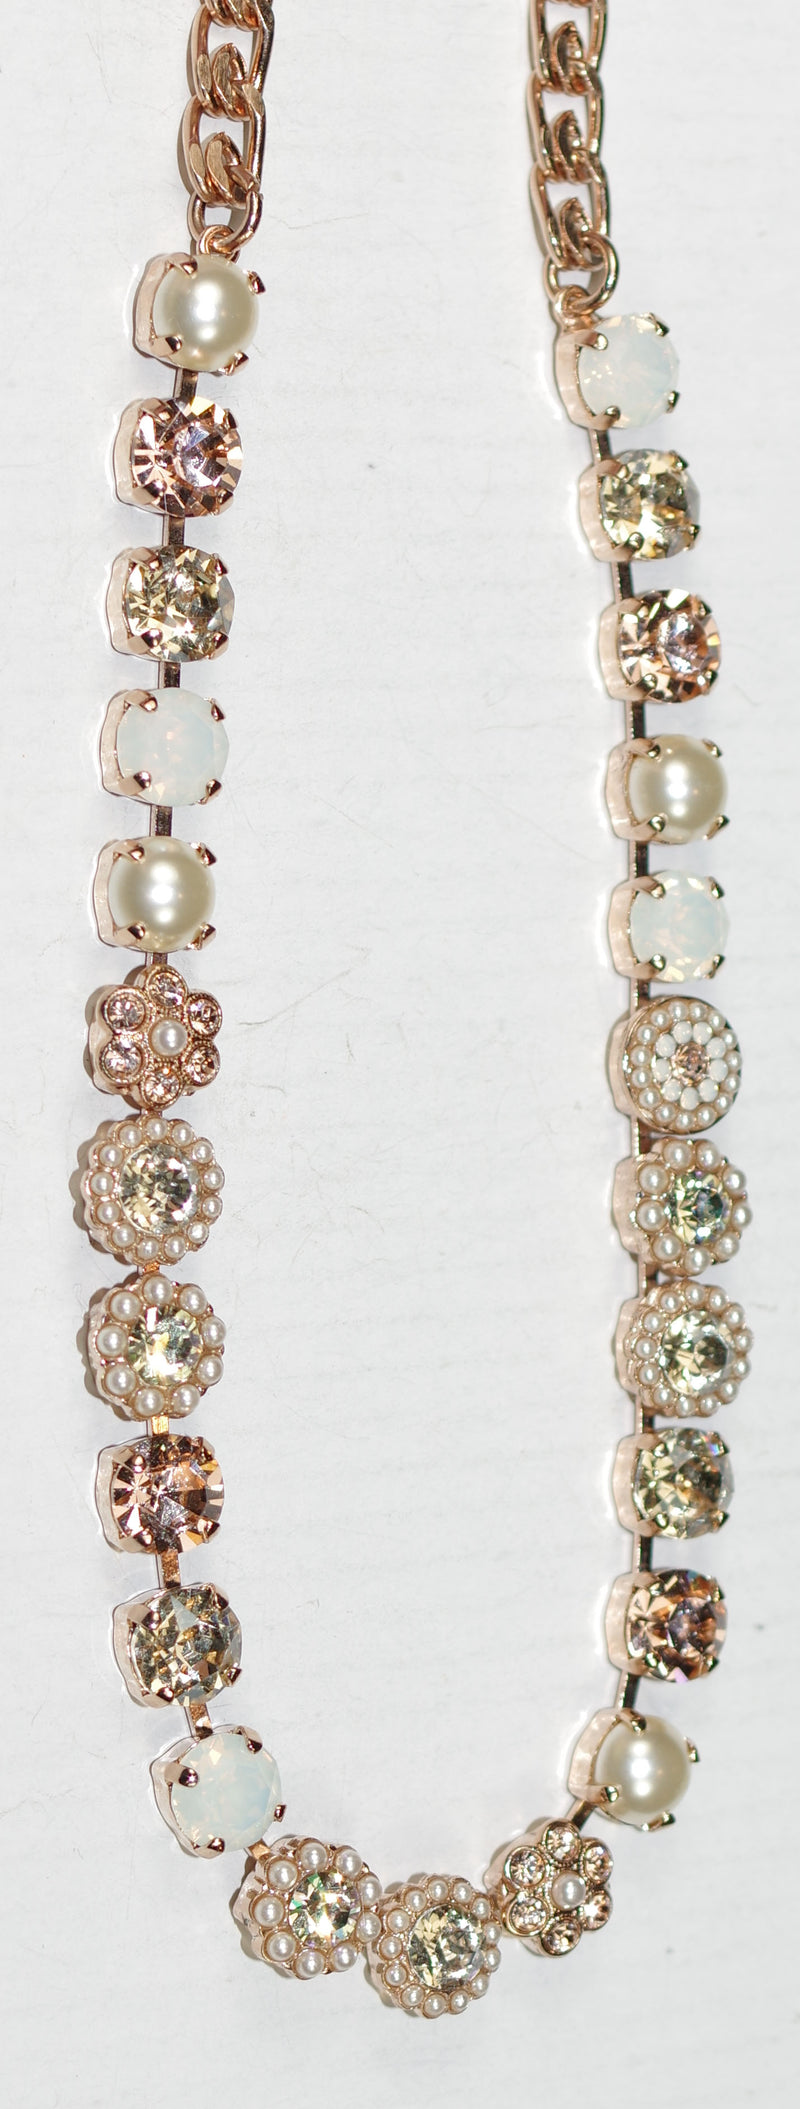 MARIANA NECKLACE COOKIE DOUGH: amber, pearl, white stones, 20" adjustable rose gold chain